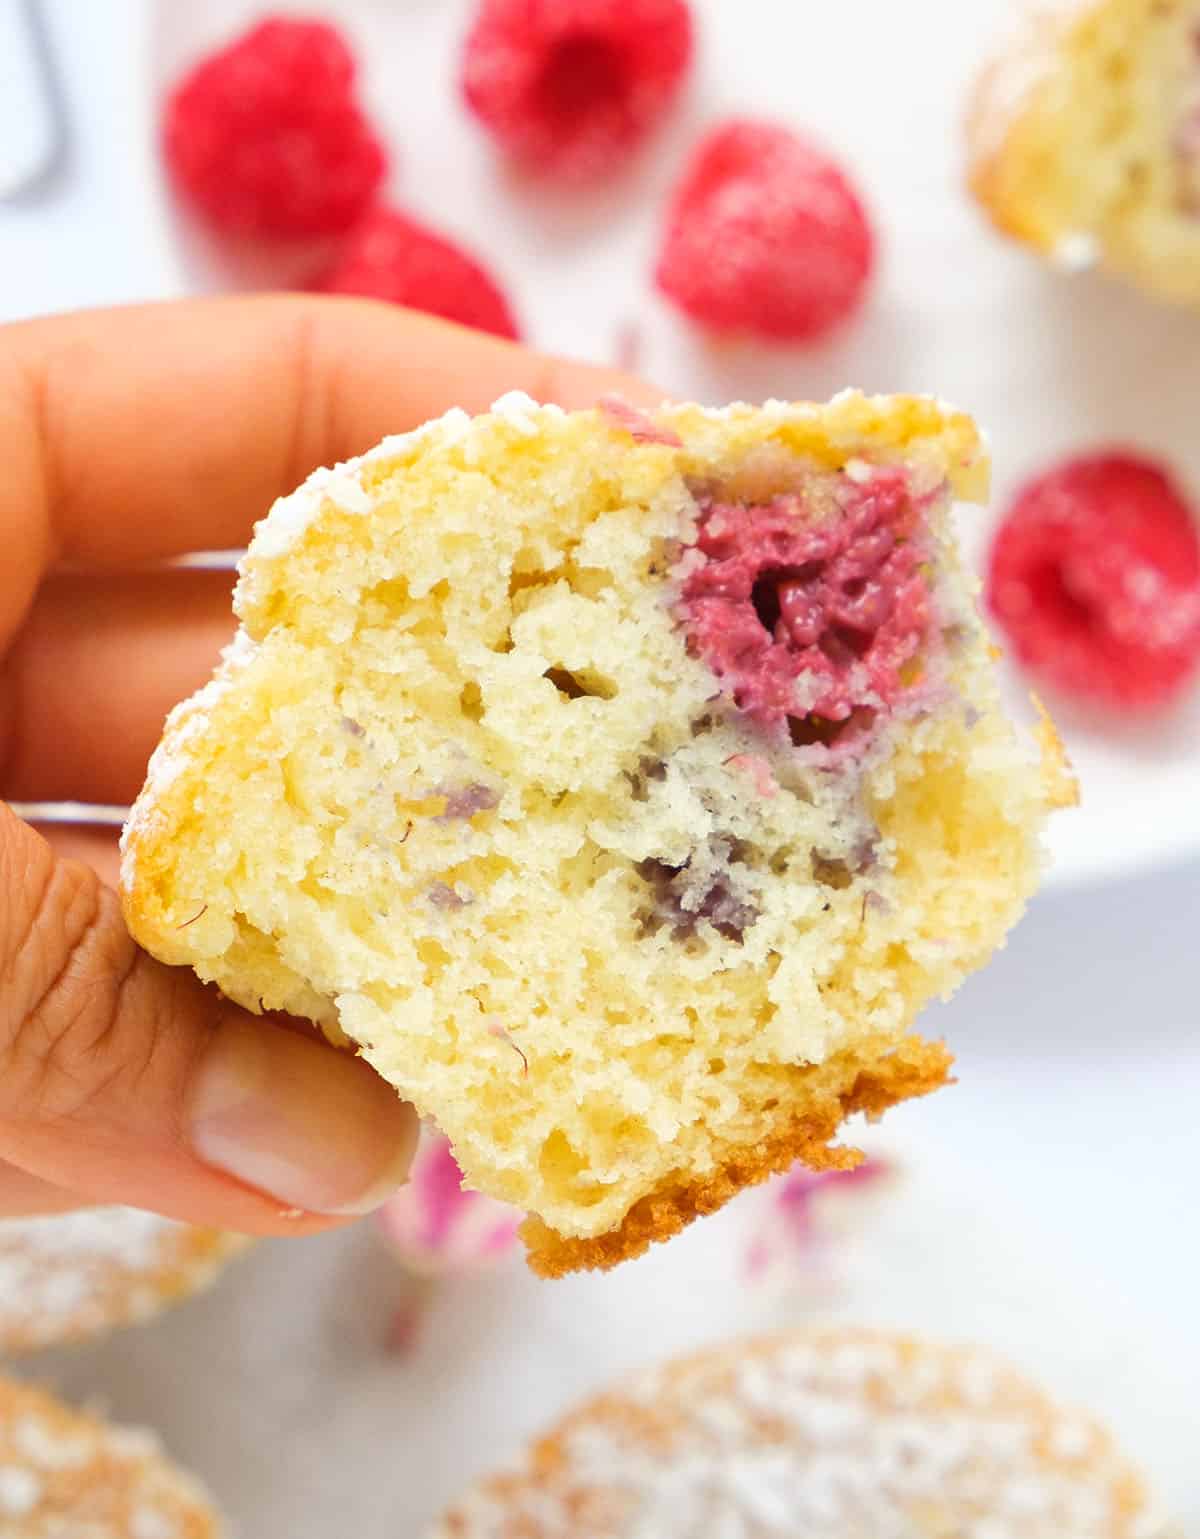 Close-up of a half muffin with raspberries/